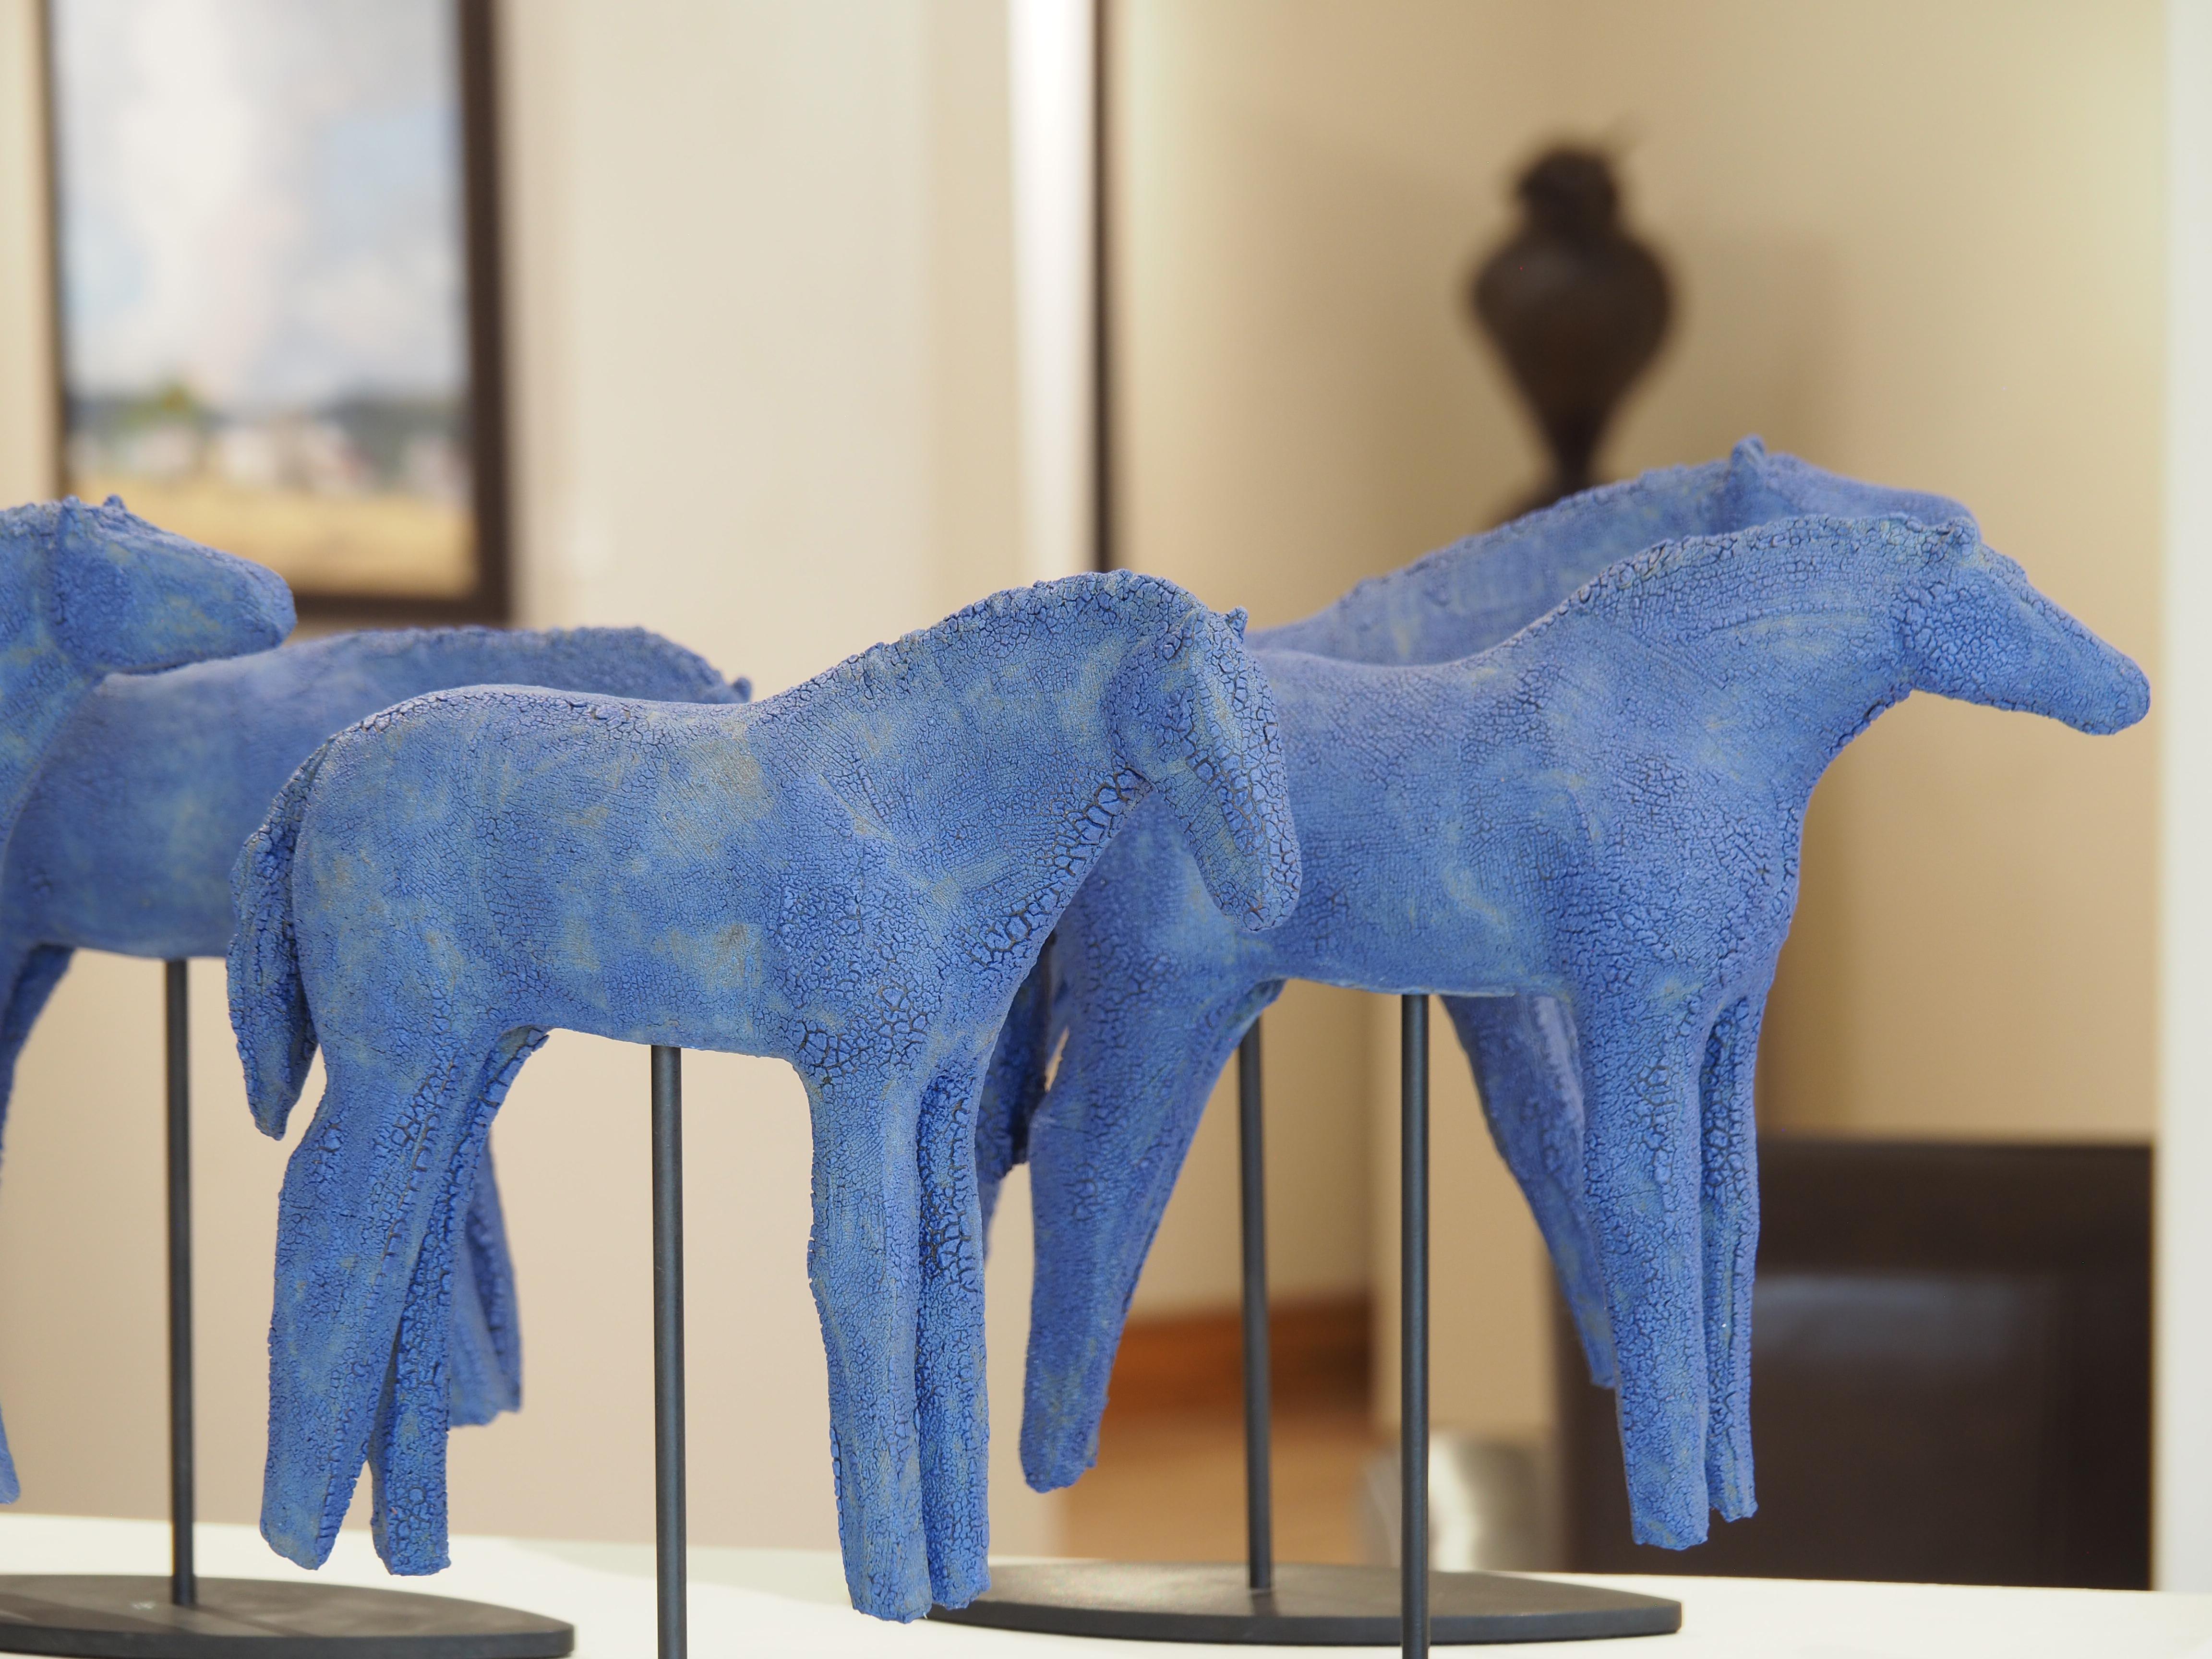 “The process of discovering the essence of a horse within the mud and transforming this into contemporary ceramic artworks remains my great joy and artistic passion.  With a nod toward ancient artifacts of countless civilizations, my sculptures